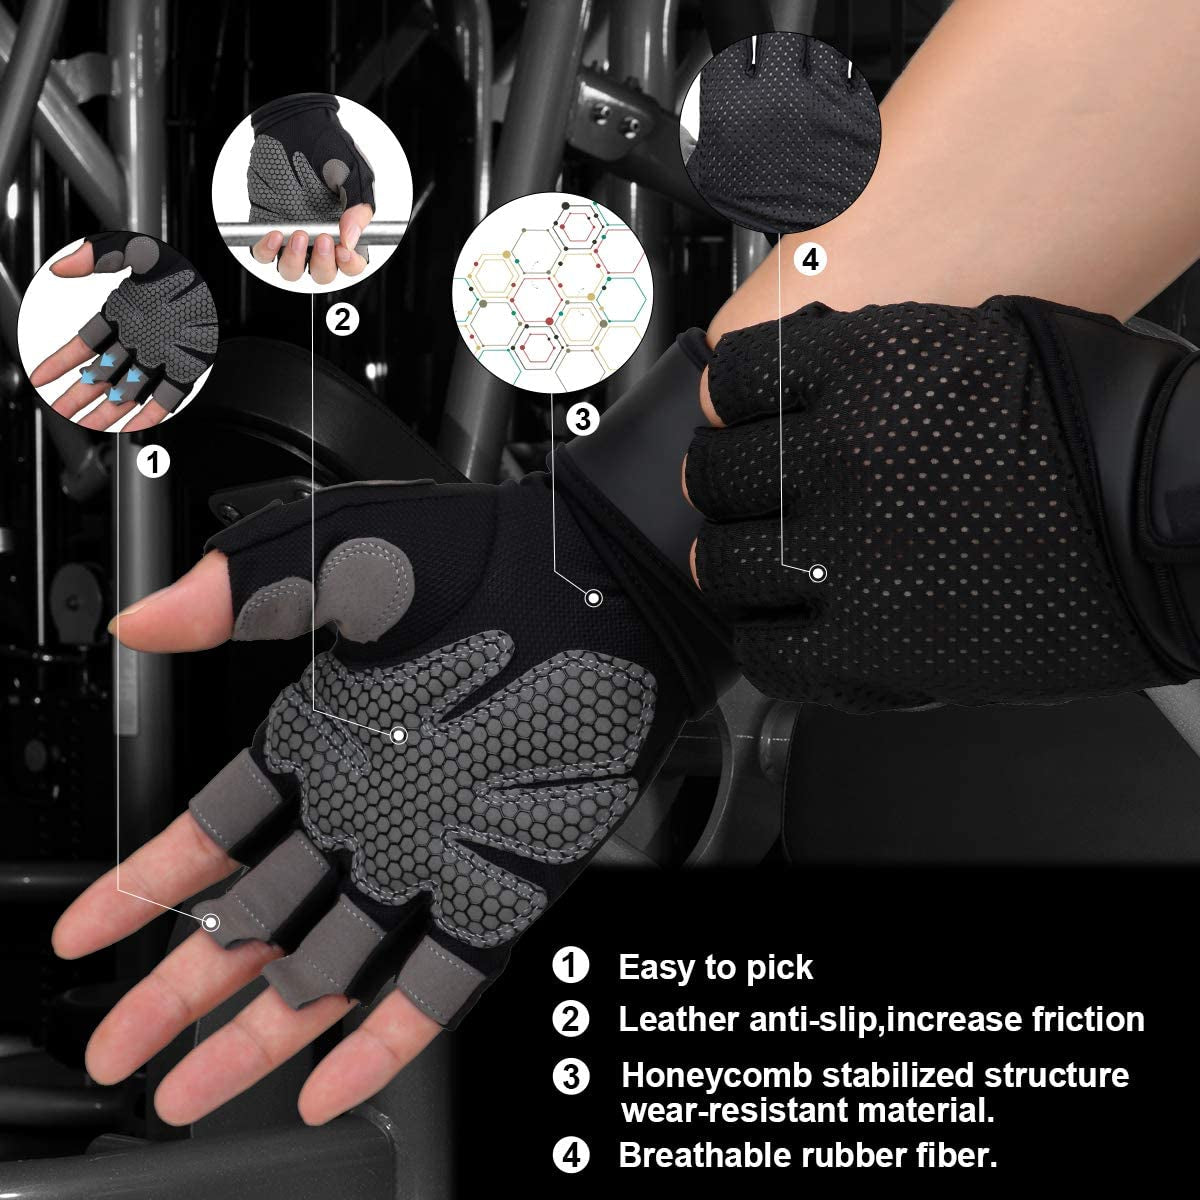 Workout Gloves Weight Lifting Fitness Gloves Rowing Biking Training Gym Grip Gloves Full Palm Protection with Wrist Support for Fitness Exercise Weight Lifting Gym.